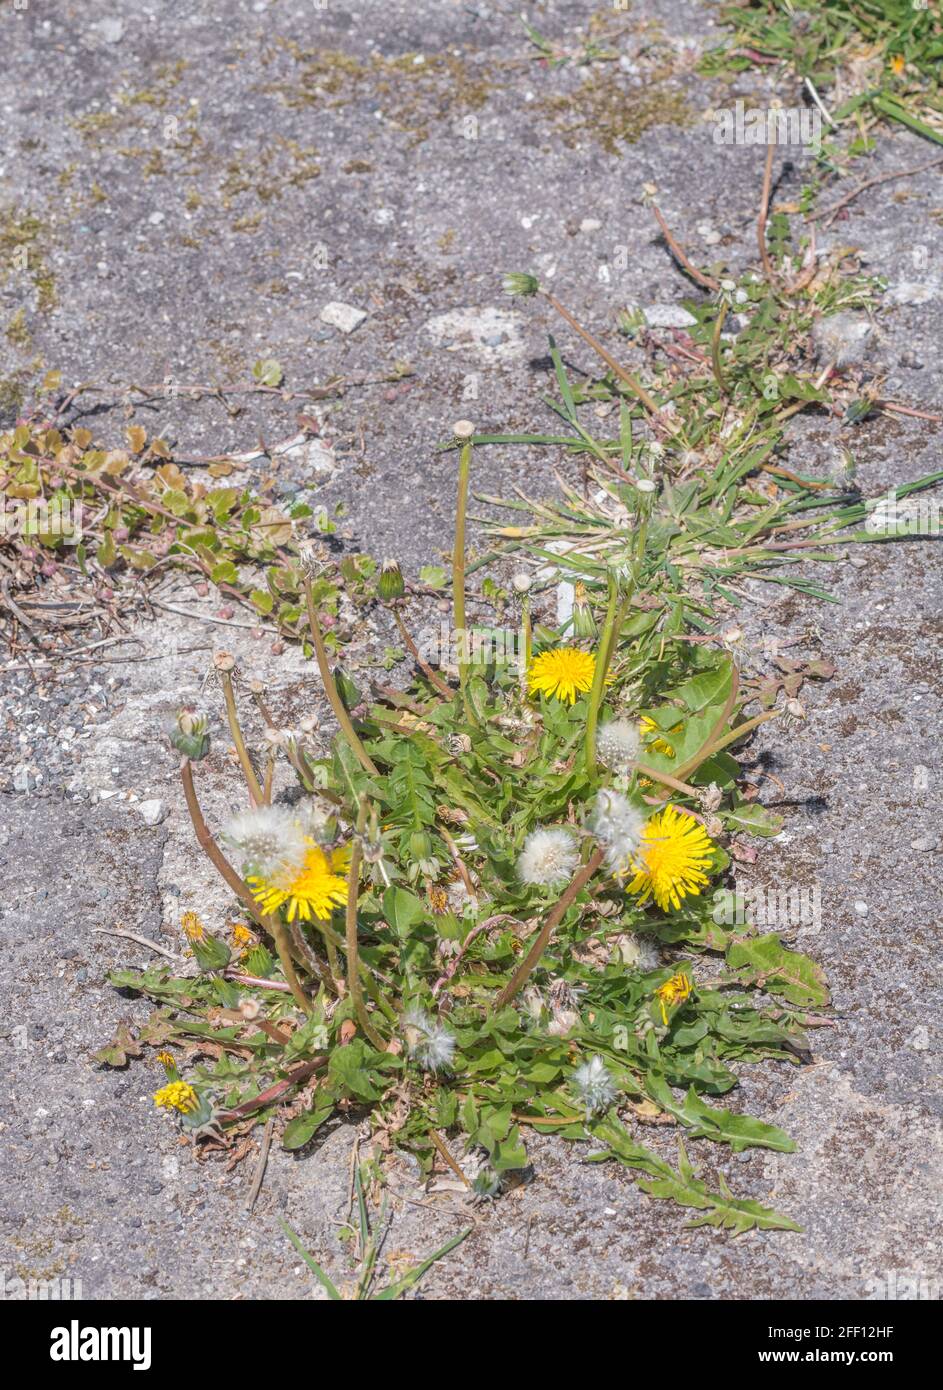 Springtime yellow Dandelion / Taraxacum officinale flowers growing in tarmac. Dandelion once used in medicinal herbal cures & also leaves edible. Stock Photo